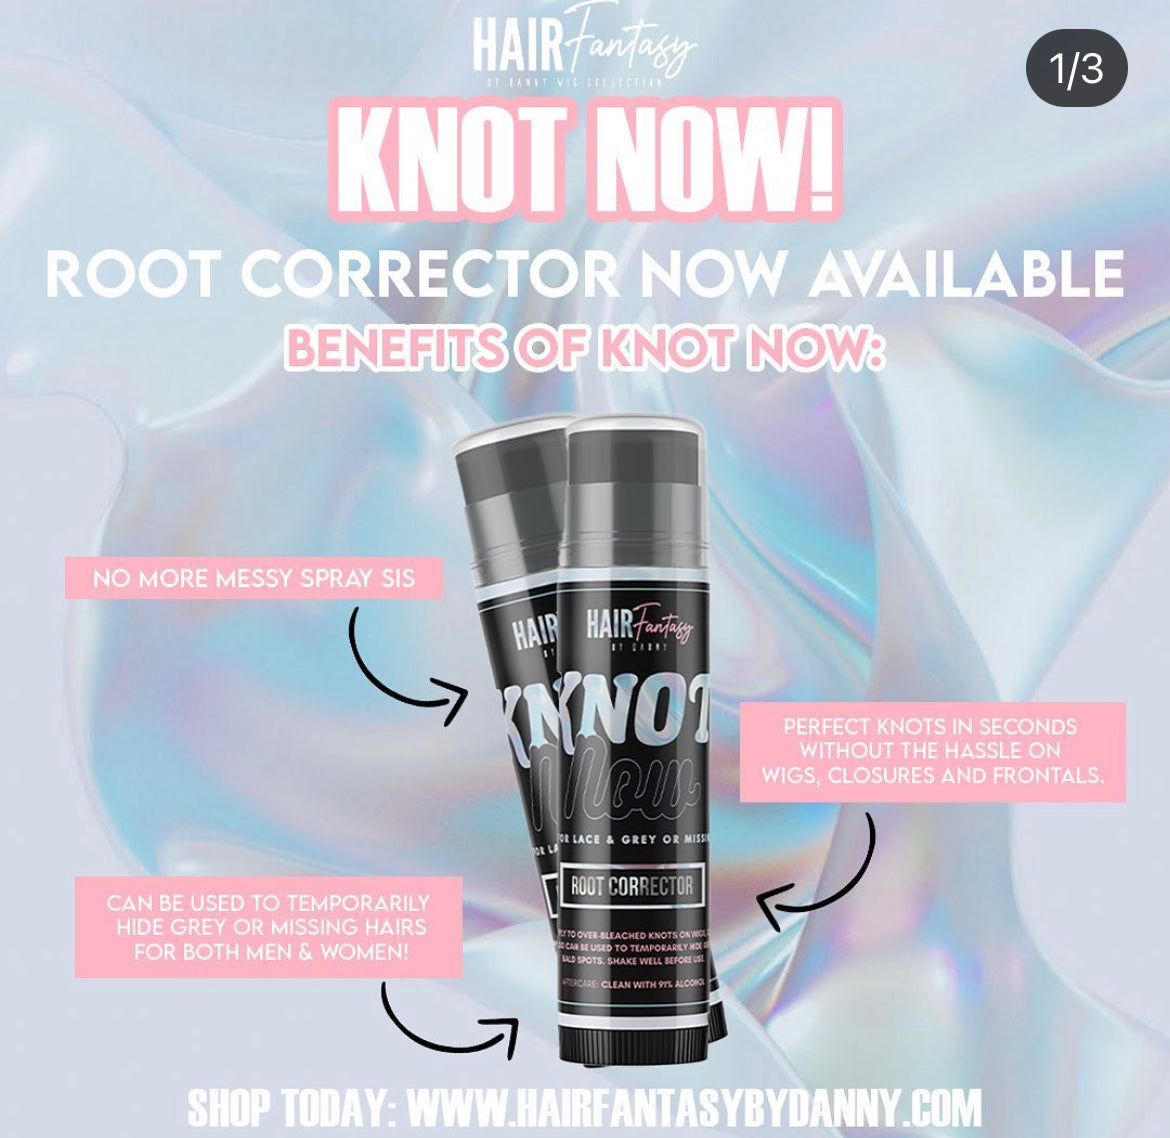 Knot now! ROOT CORRECTOR